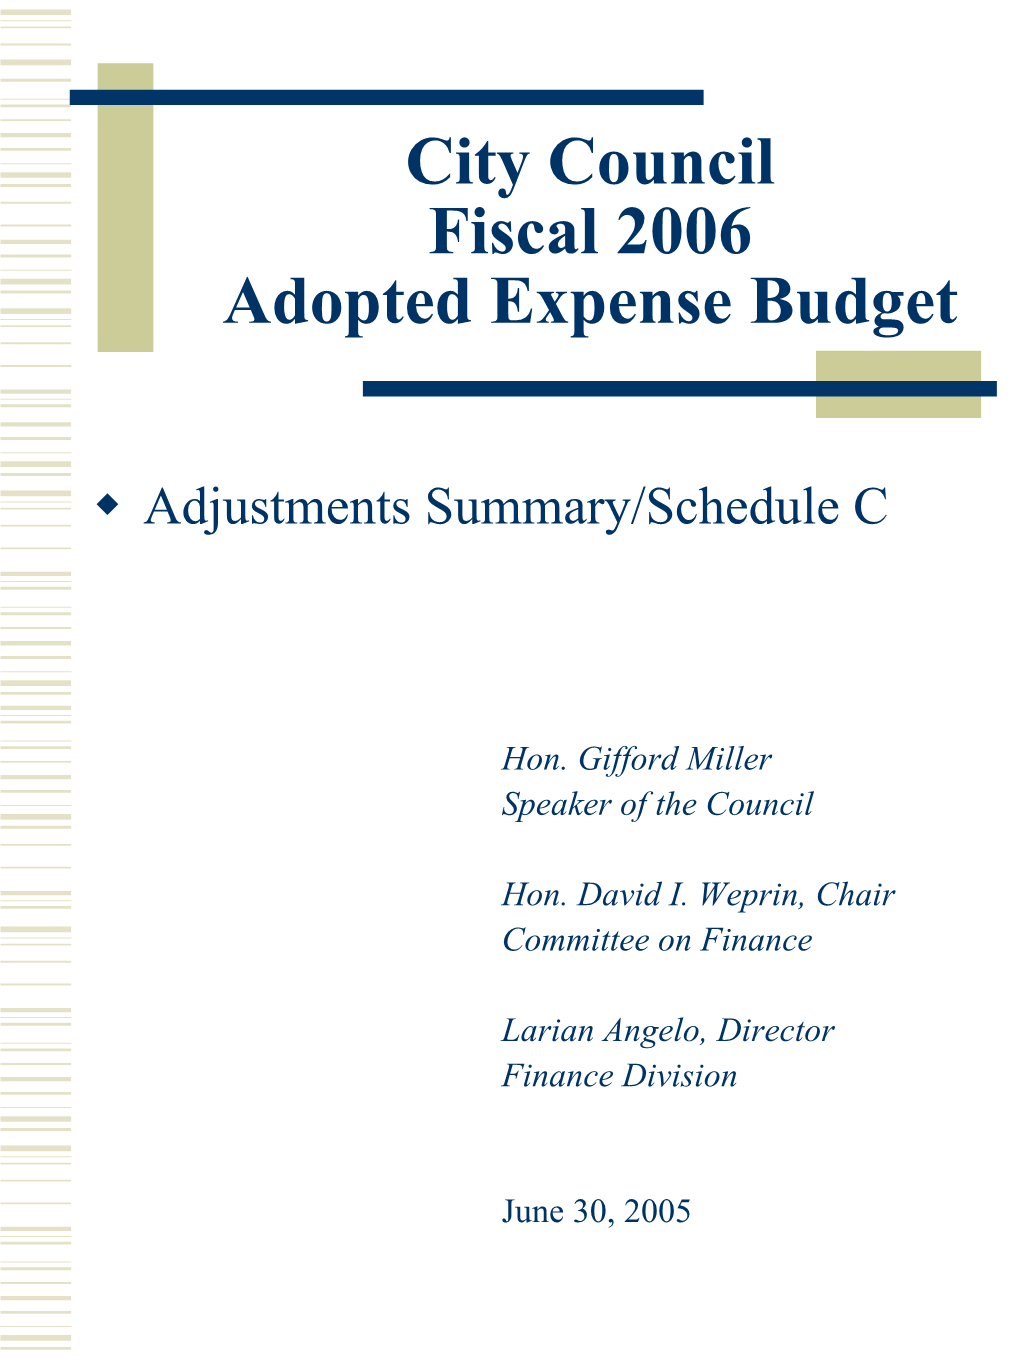 Adopted Expense Budget